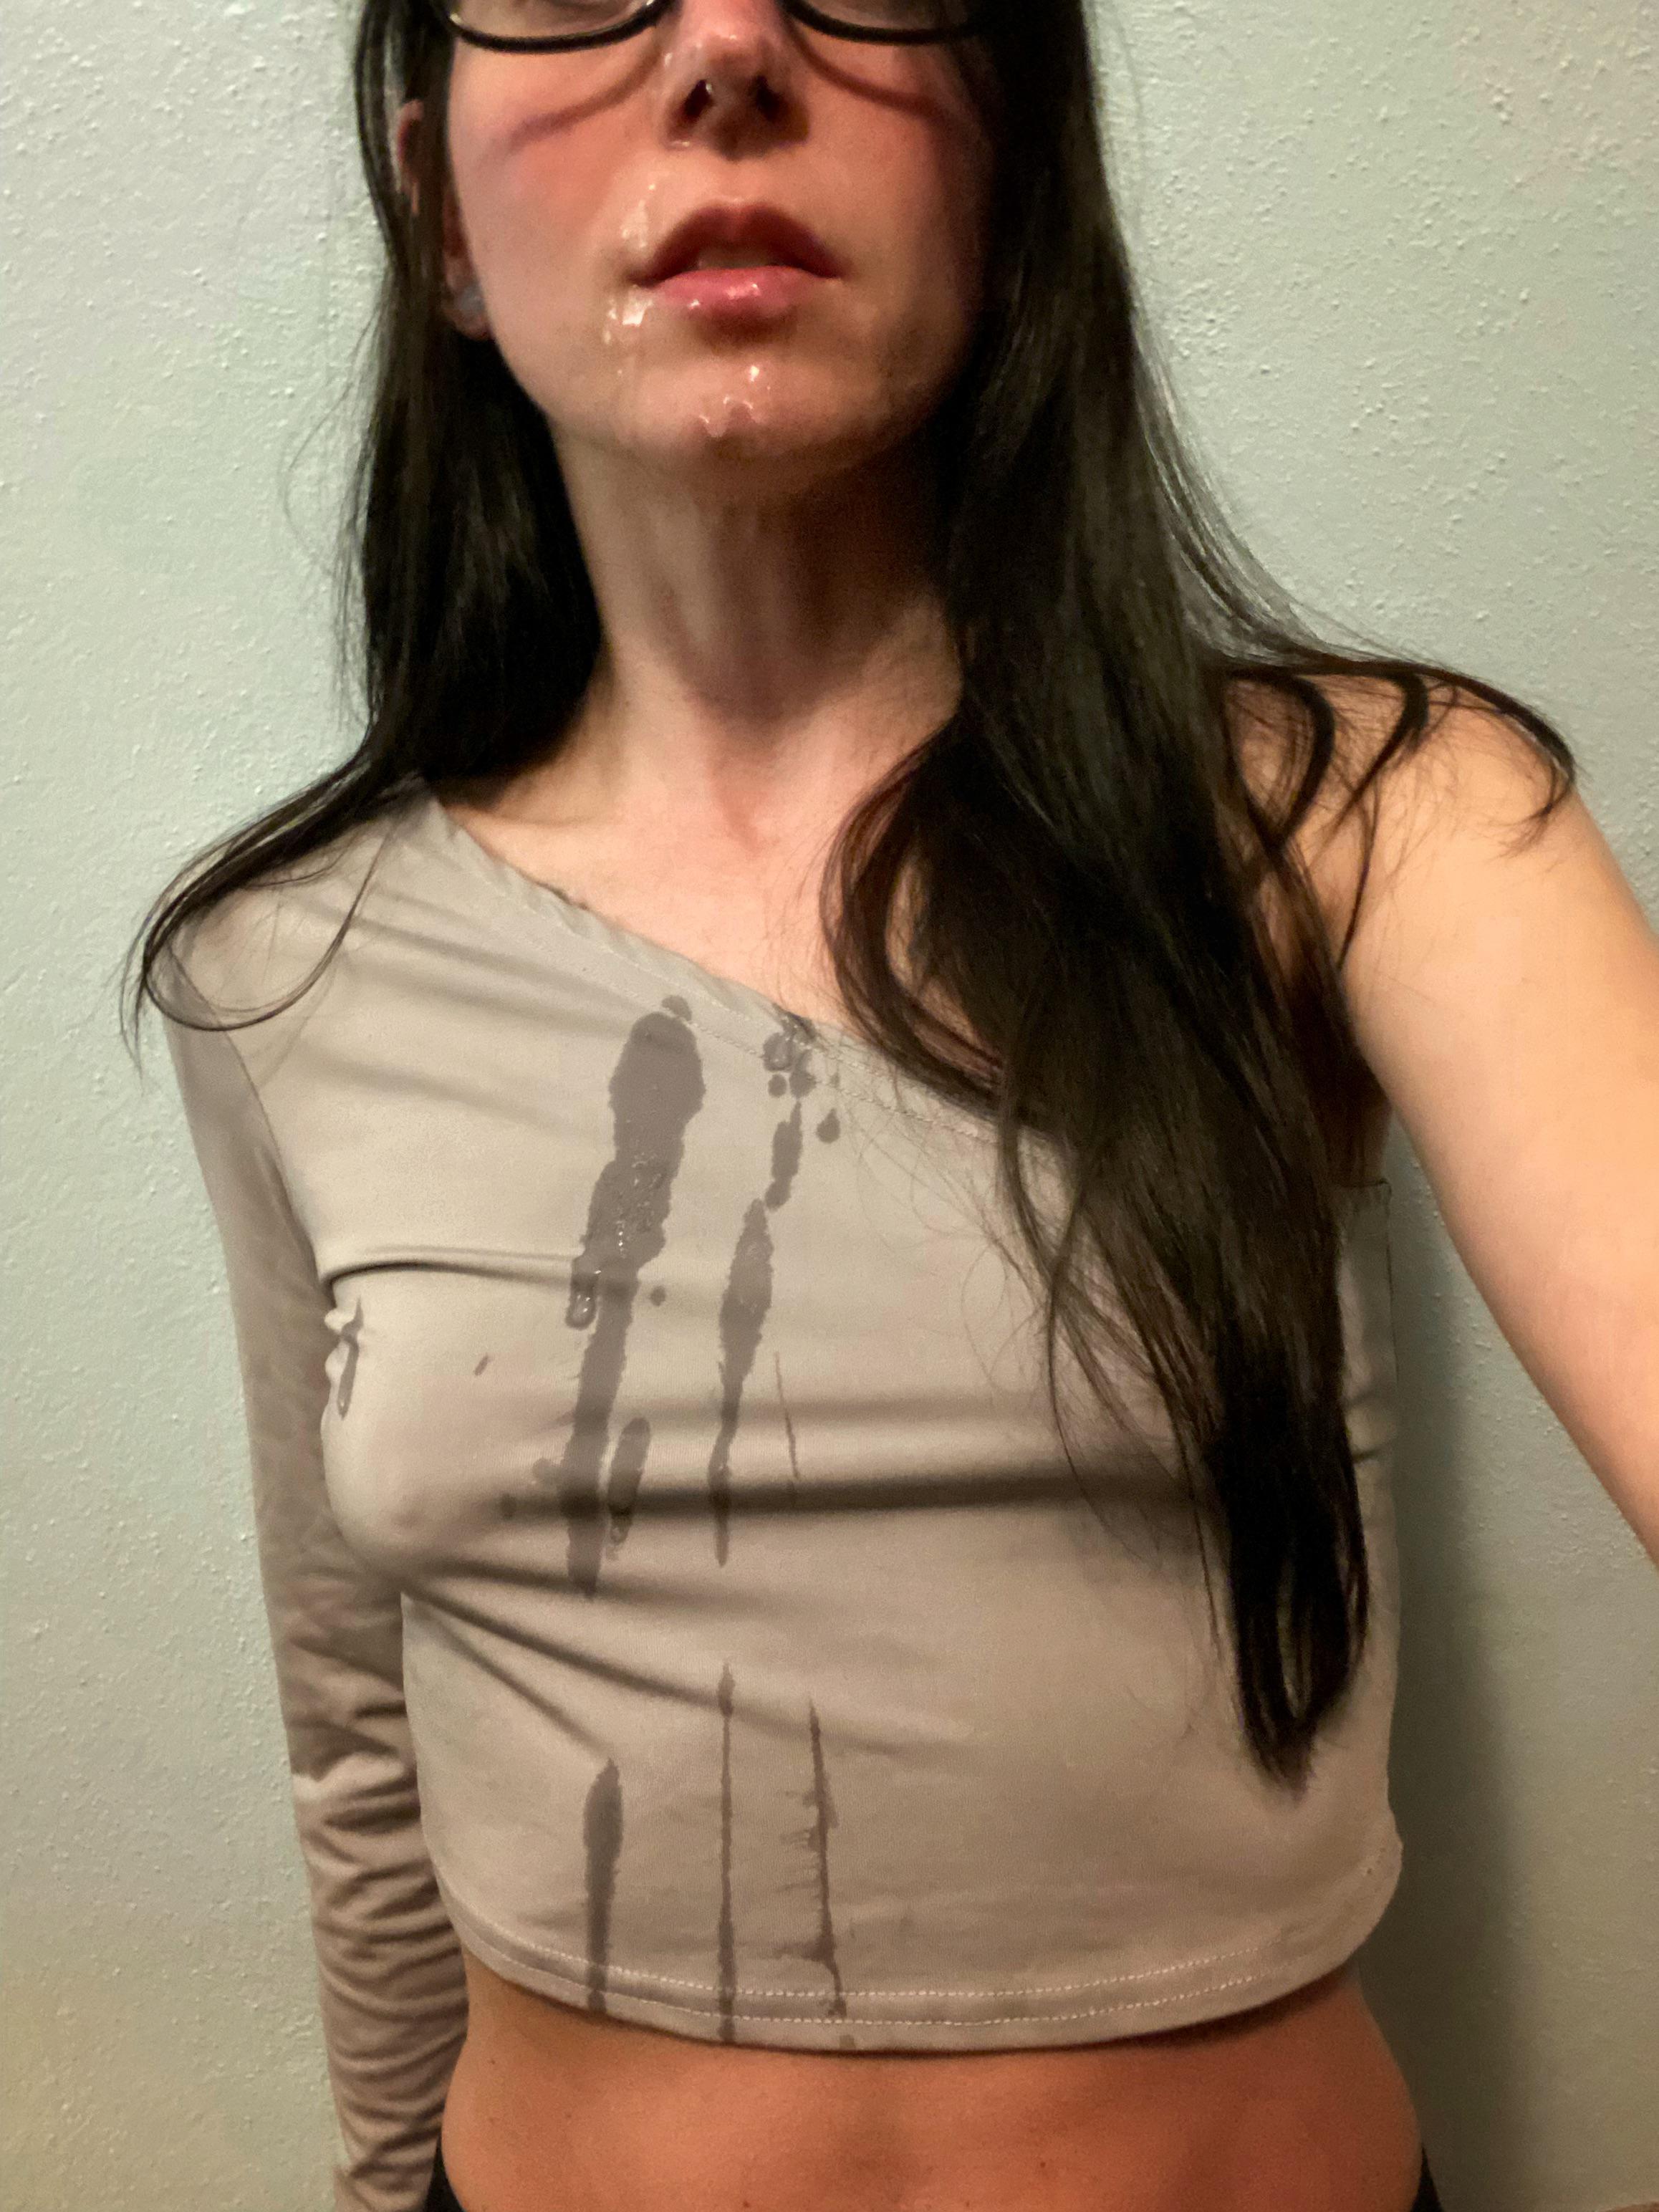 Cum looks good on my face and clothes photo